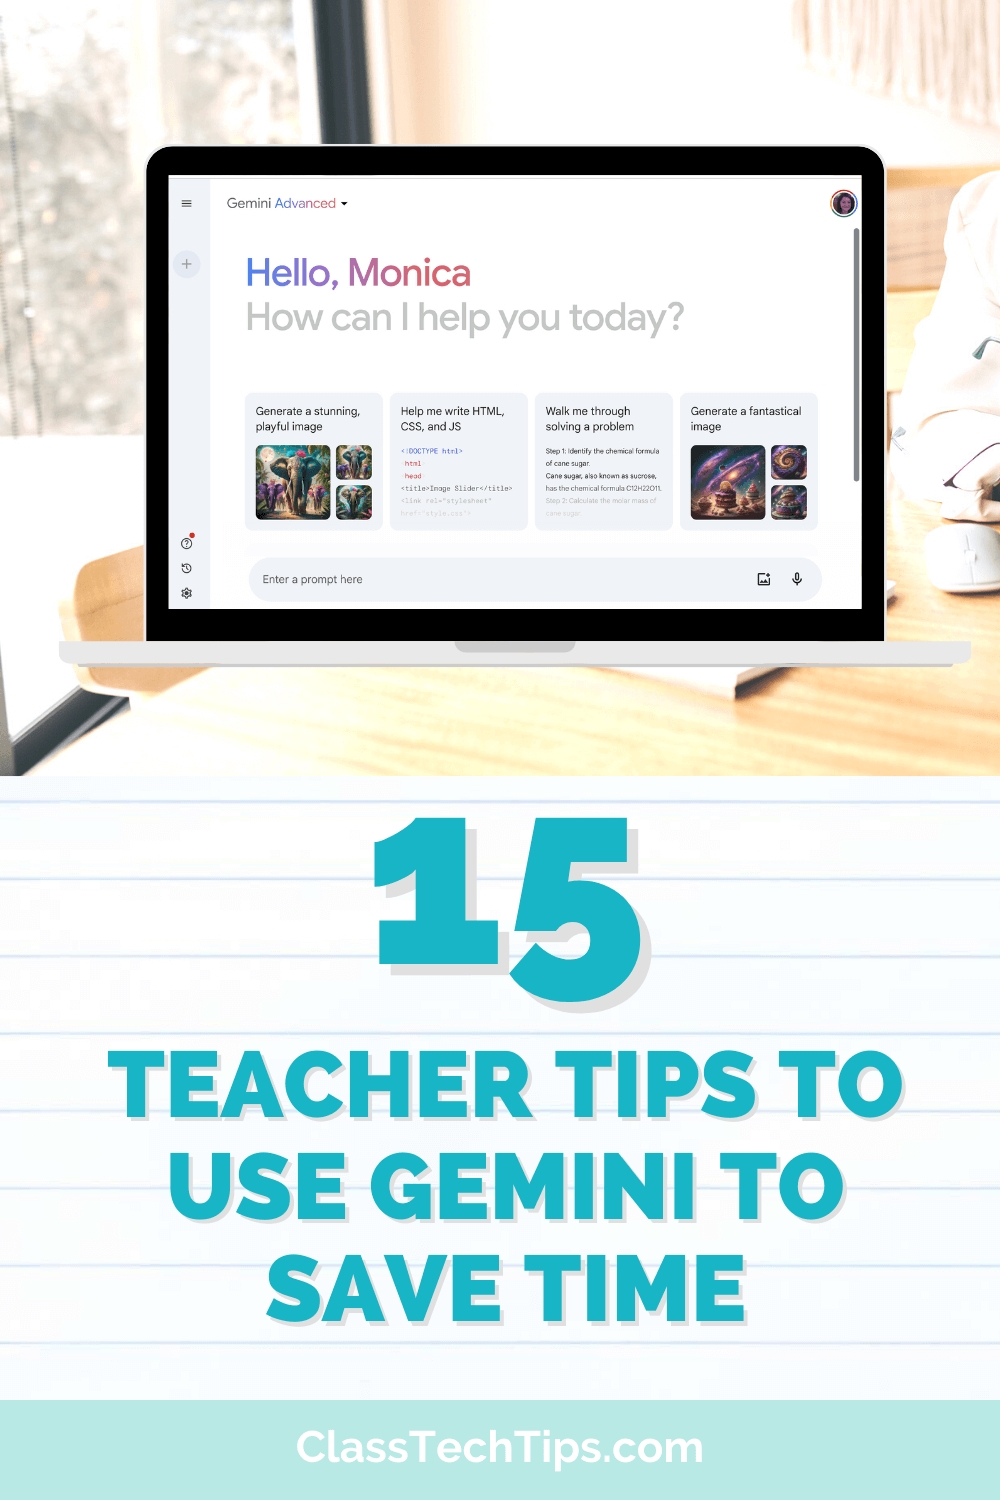 An image of a tablet propped on a desk, showing the Gemini Advanced app with options for creating images, coding, and problem-solving. Above the tablet, there's bold text stating '15 Teacher Tips to Use Gemini to Save Time'.